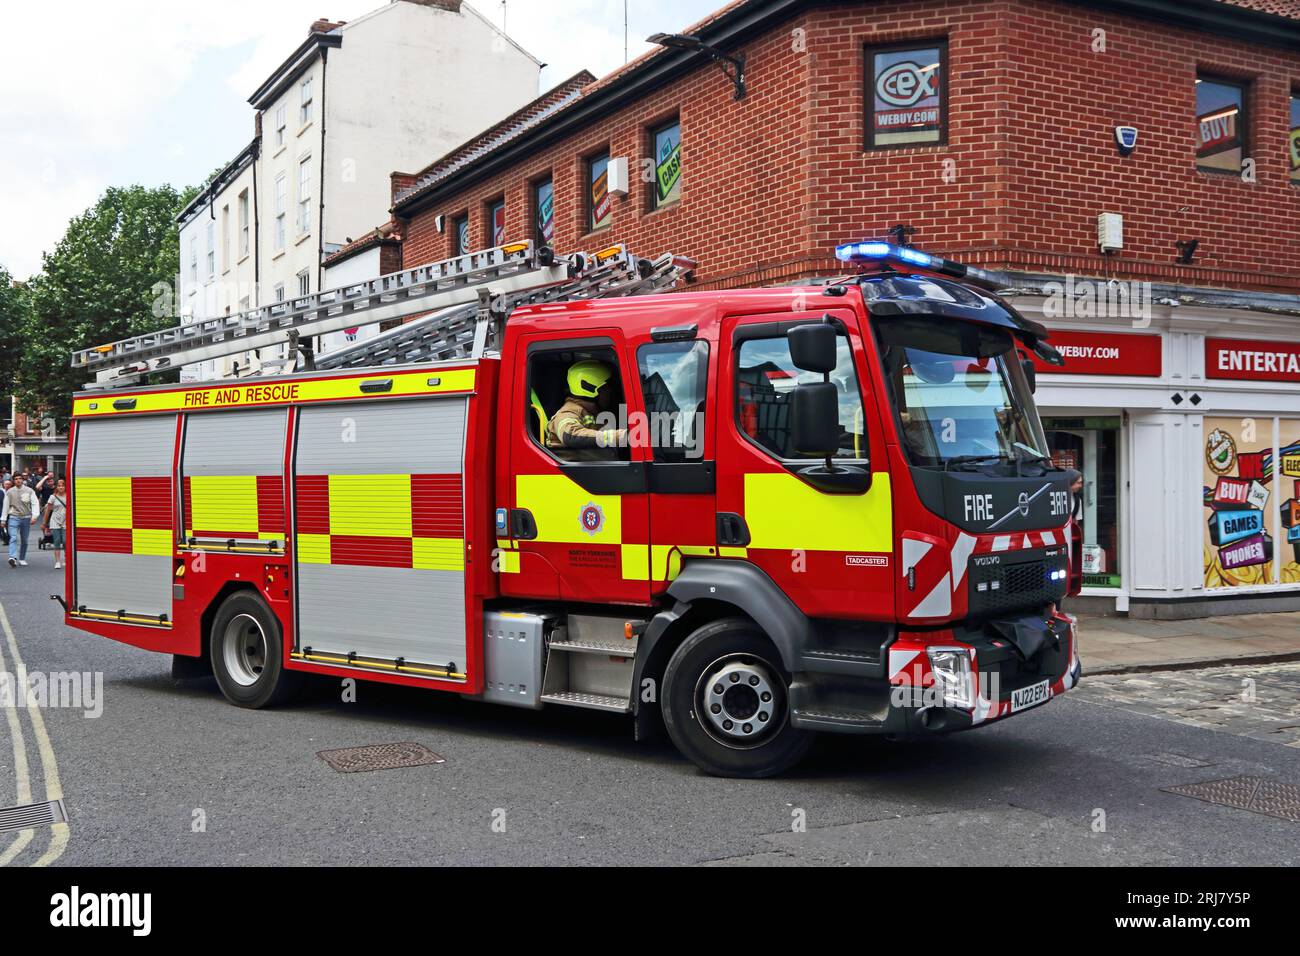 Tadcaster station Fire Engine attending emergency call out in York Stock Photo